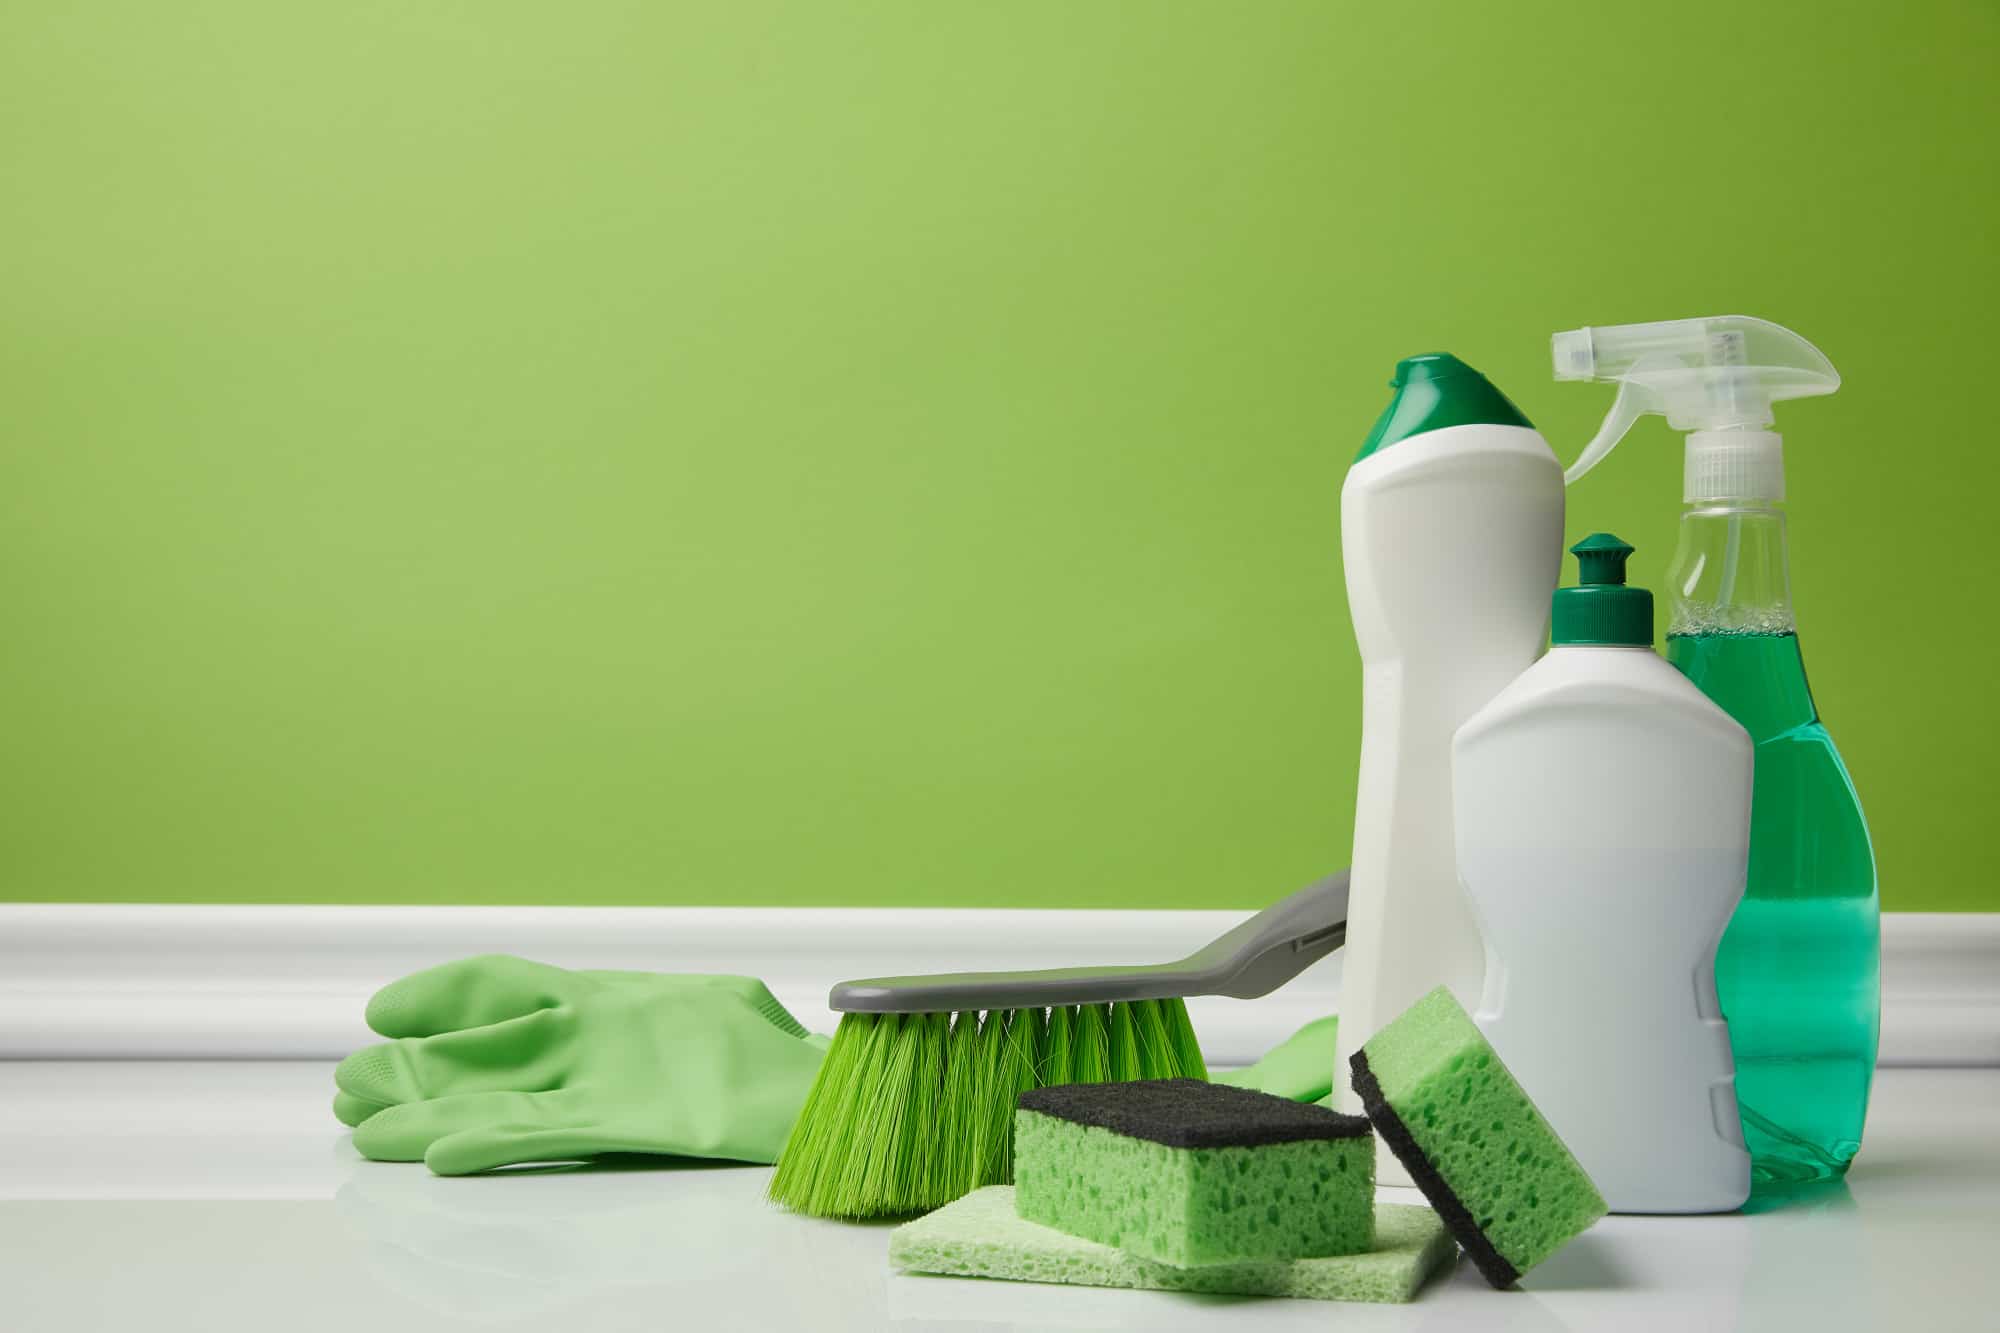 Cleaning bottles and supplies against a green background.